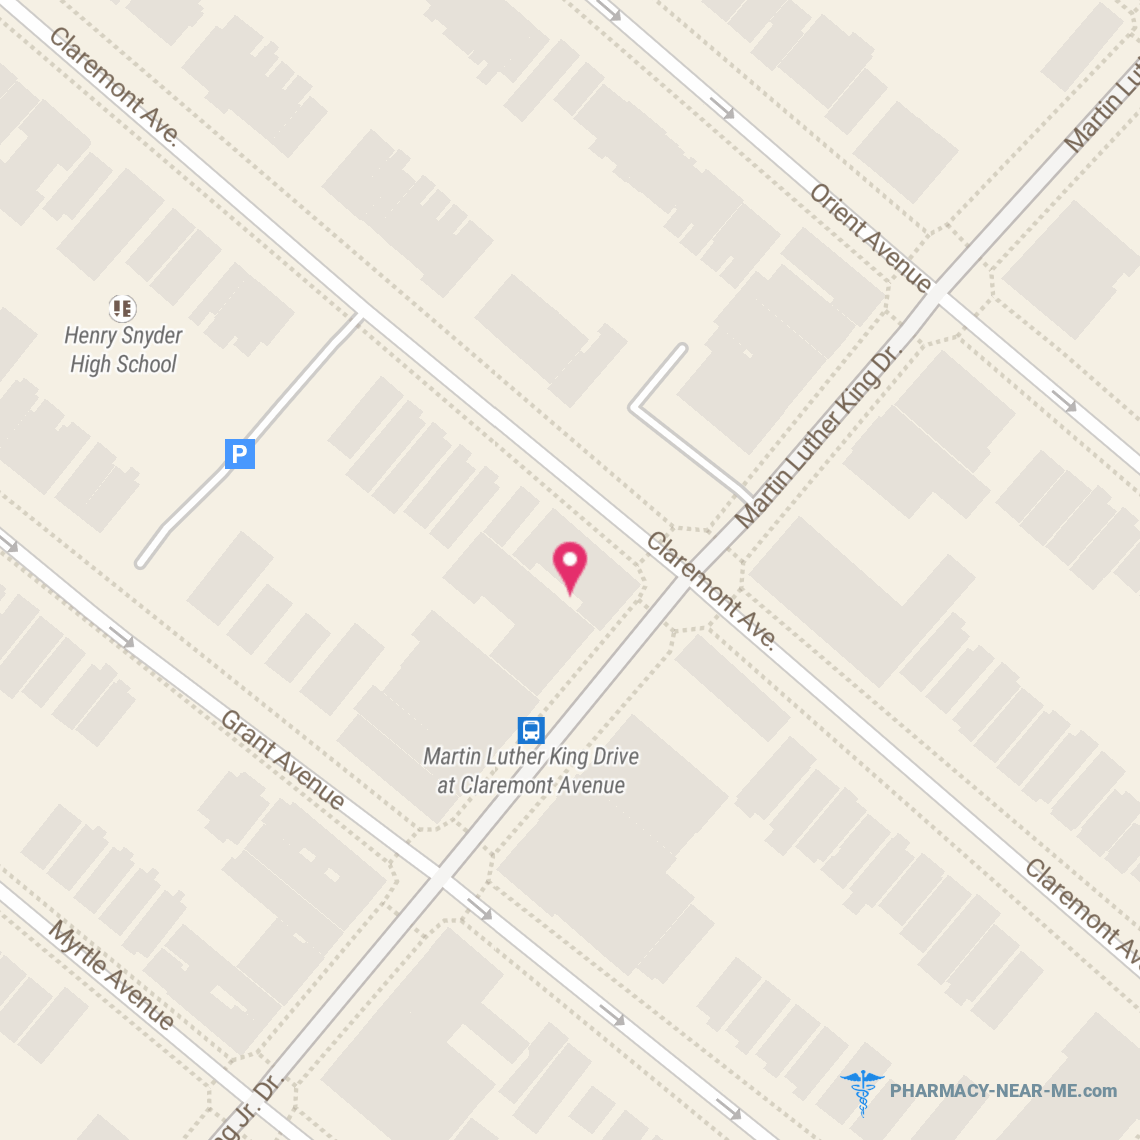 CONCORD PHARMACY LLC - Pharmacy Hours, Phone, Reviews & Information: 317 Martin Luther King Jr Drive, Jersey City, New Jersey 07305, United States